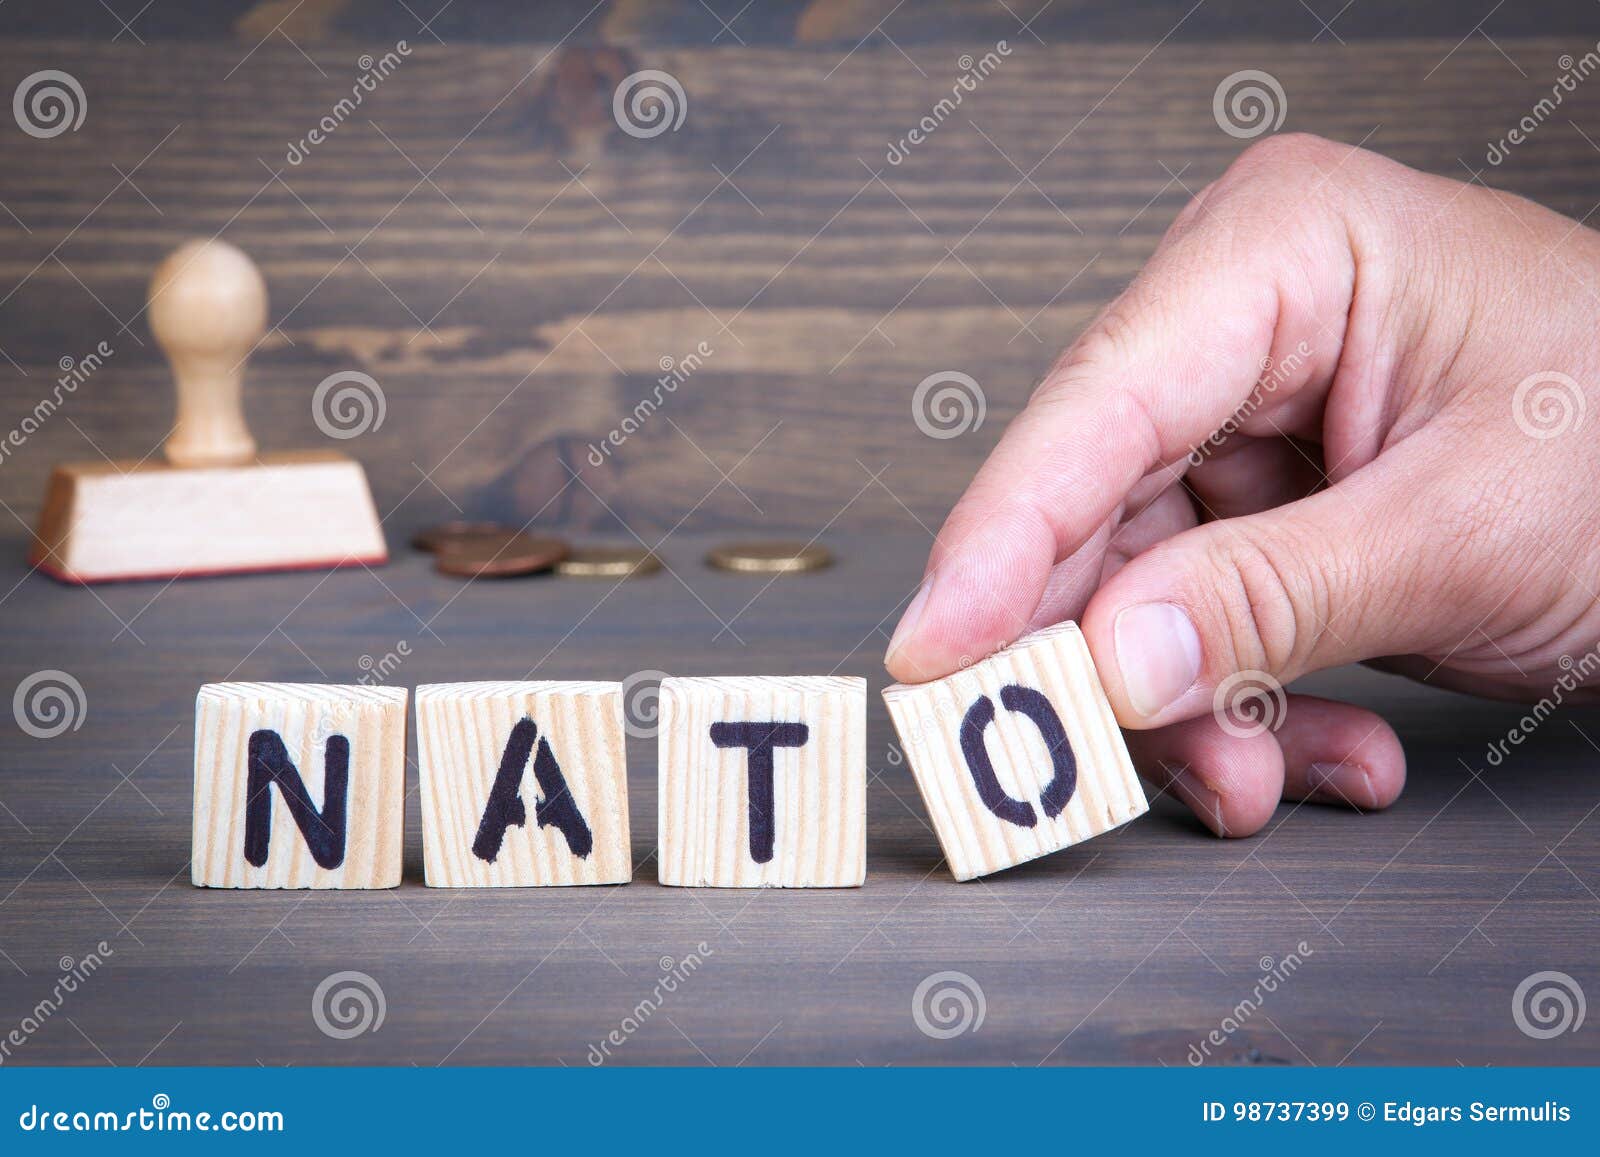 nato from wooden letters on wooden background